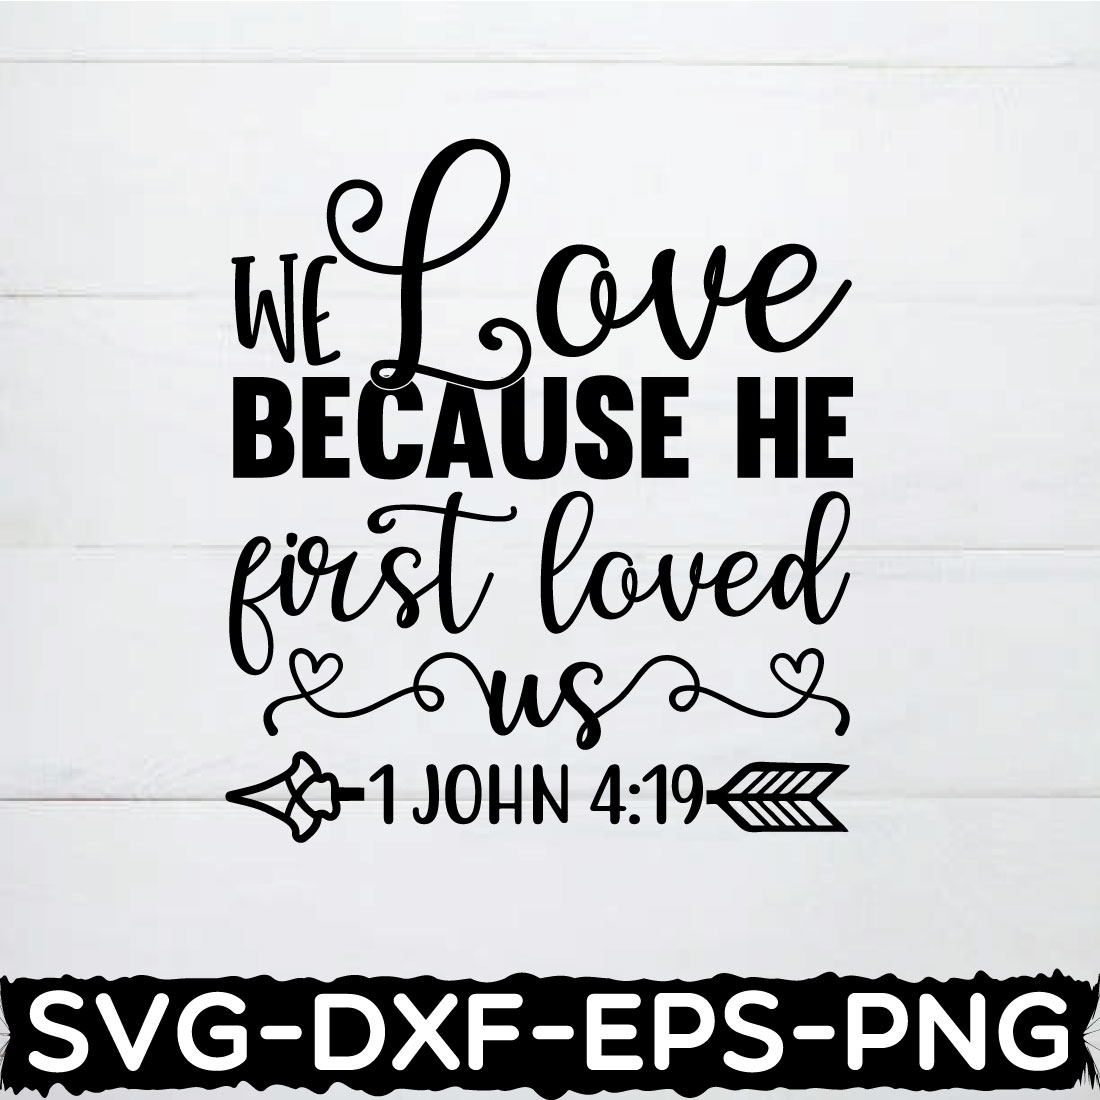 we love because he first loved us 1 john 4:19 shirt cover image.